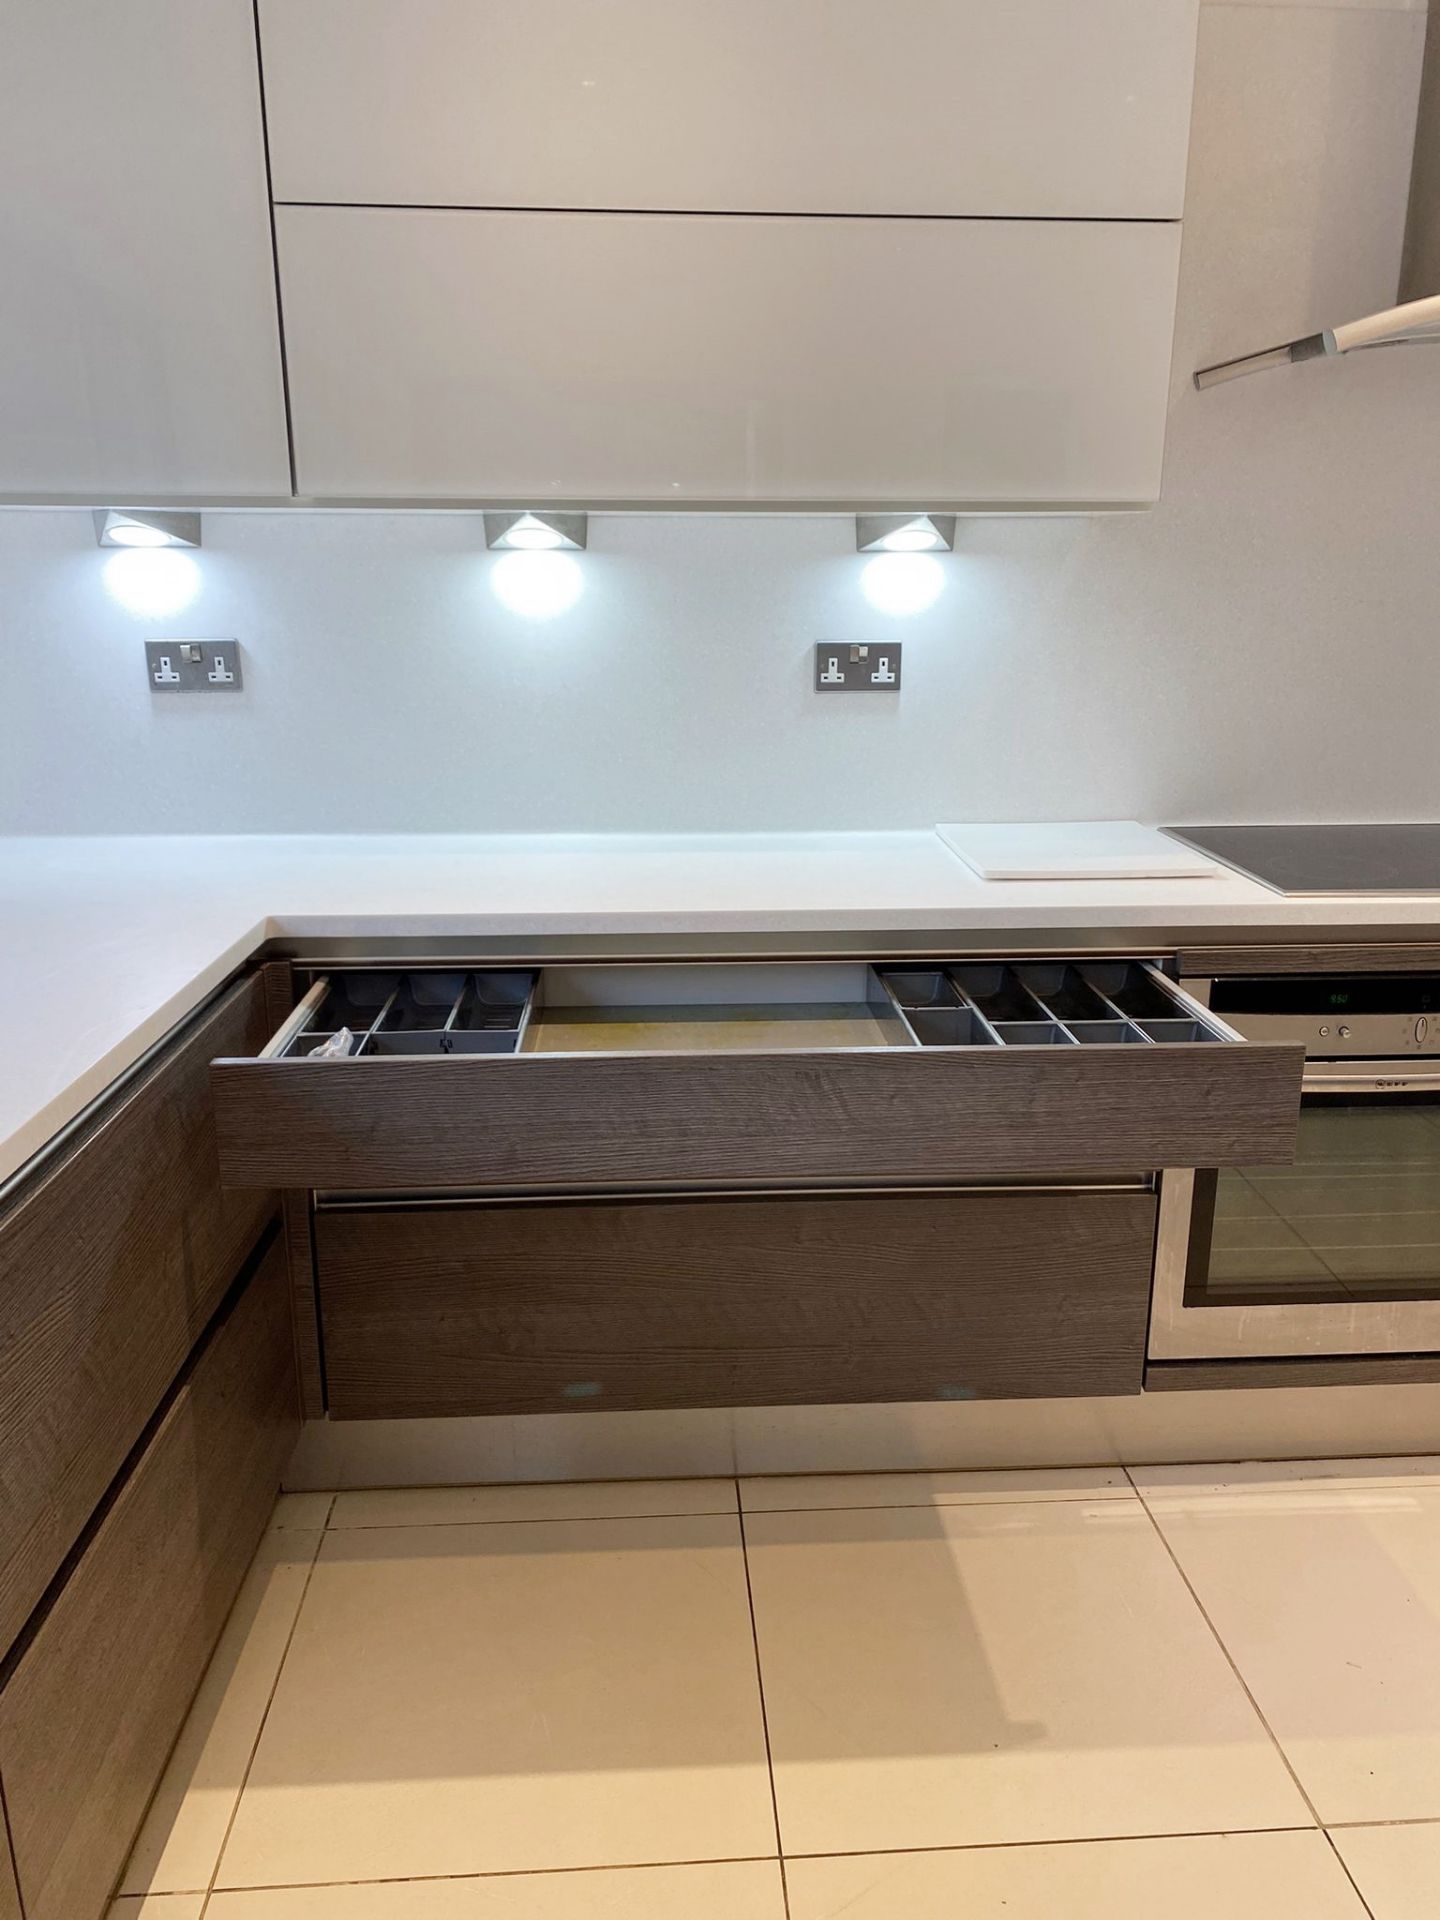 Bespoke Fitted Premium RWK German Kitchen With NEFF Appliances, Corian Worktops And Central Island - Image 9 of 30